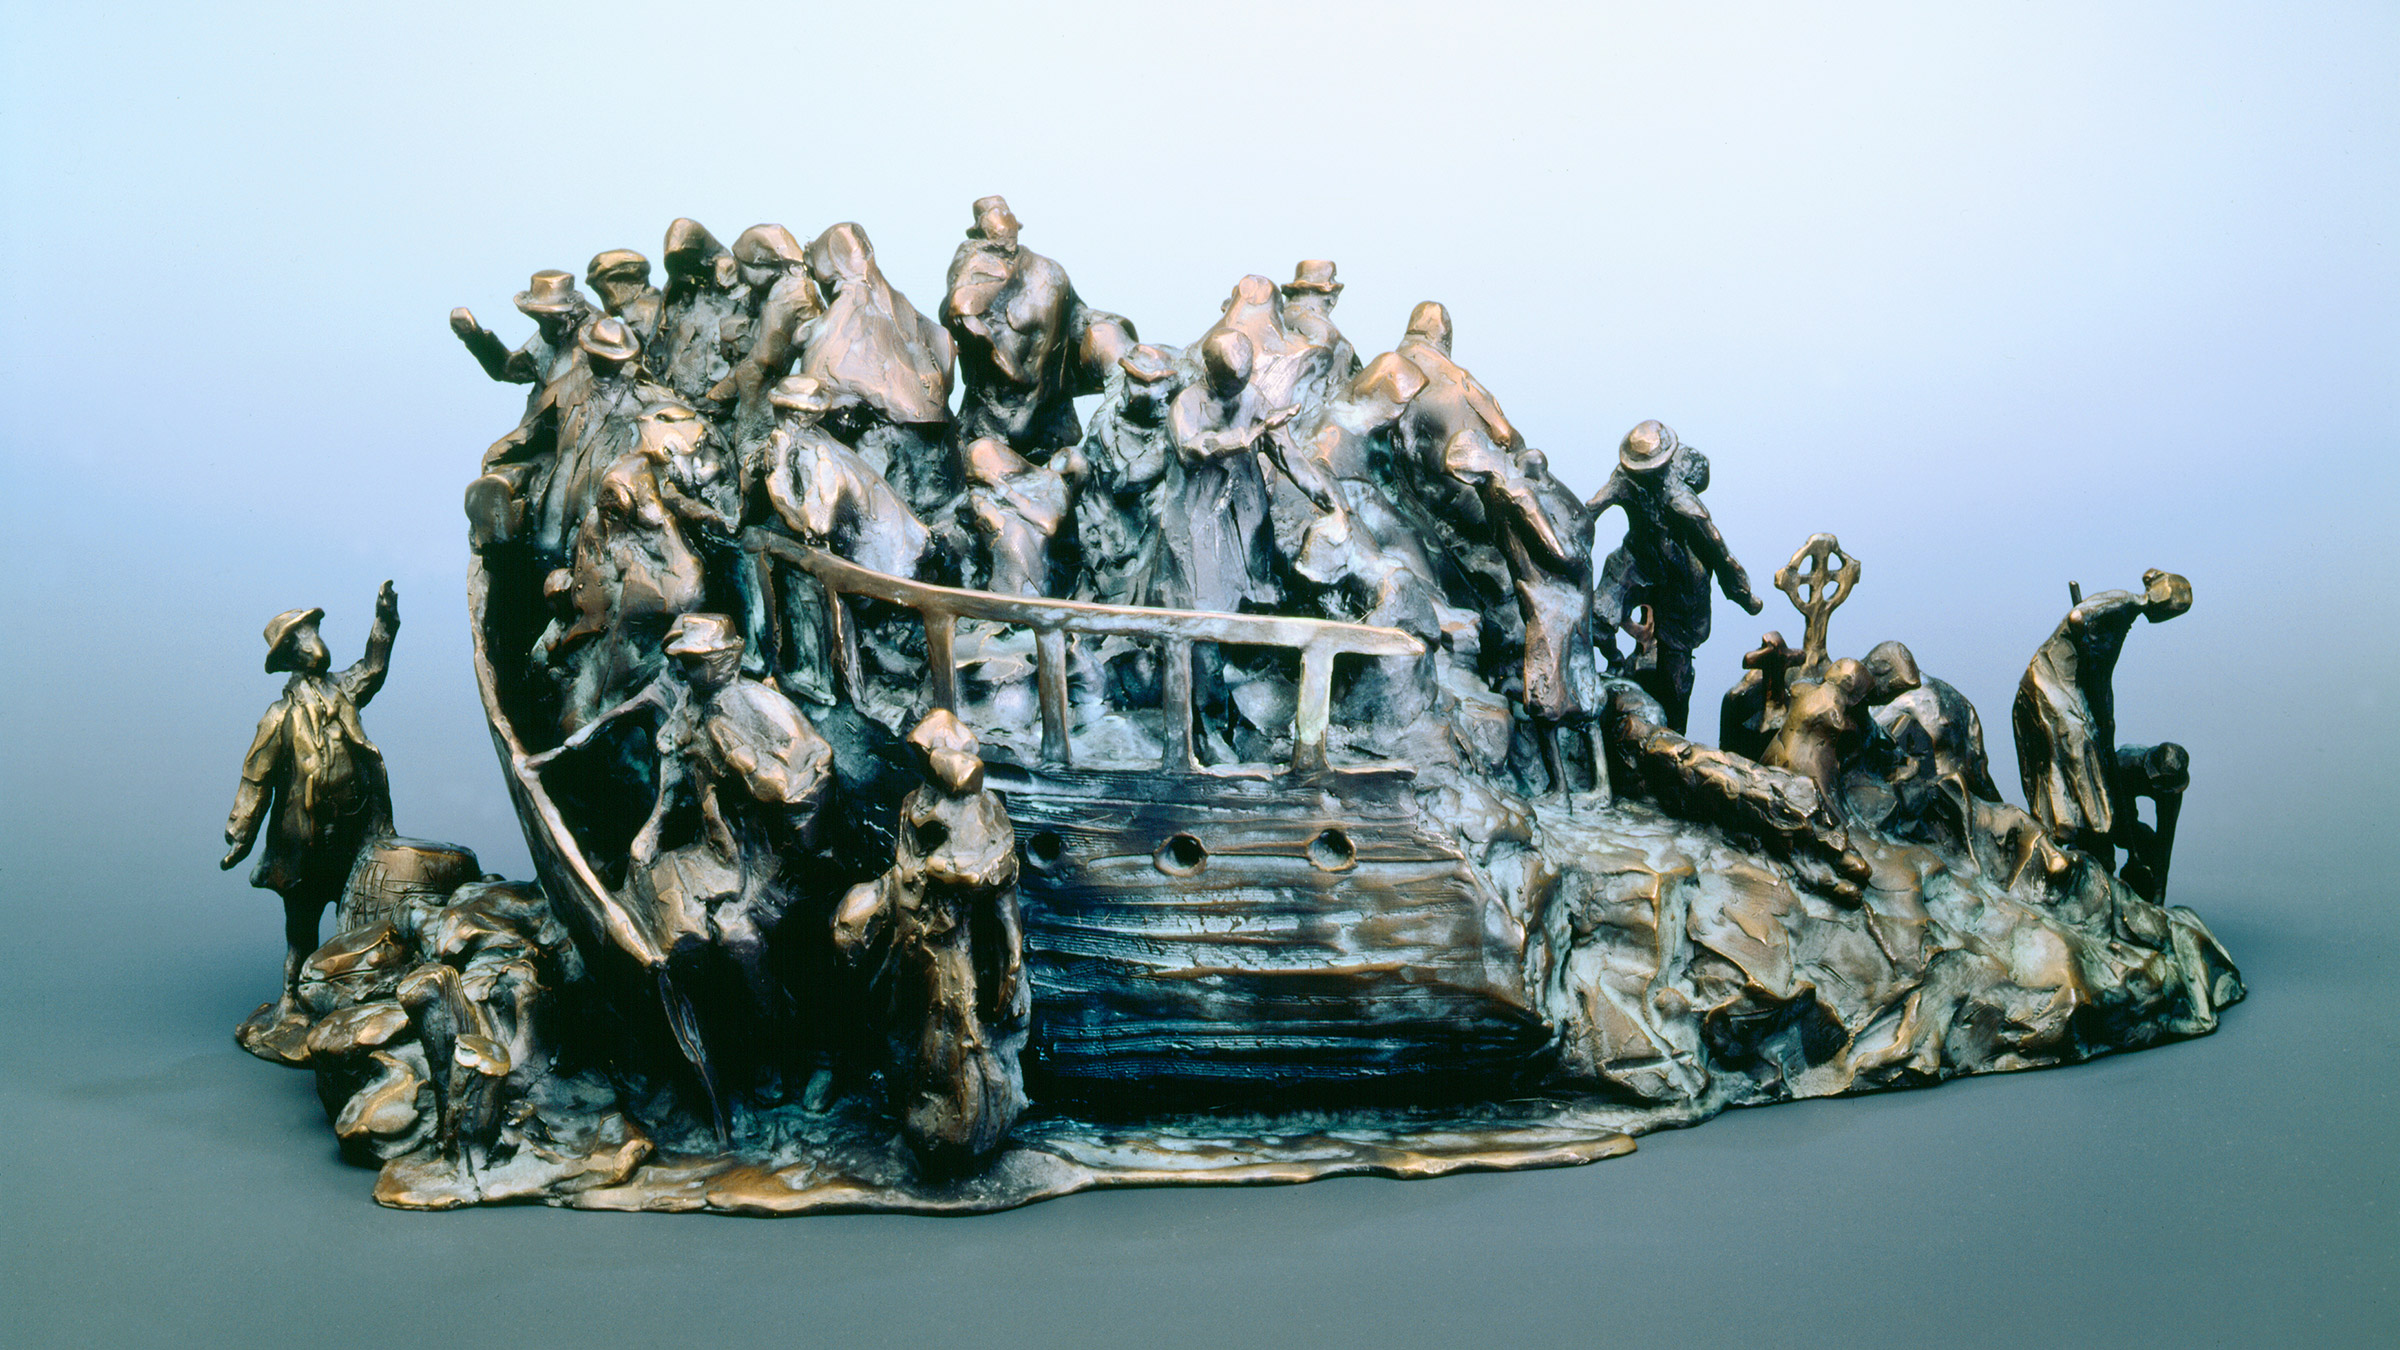 A photo of the sculpture entitled "Irish Famine Memorial Maquette" by the artist Glenna Goodacre